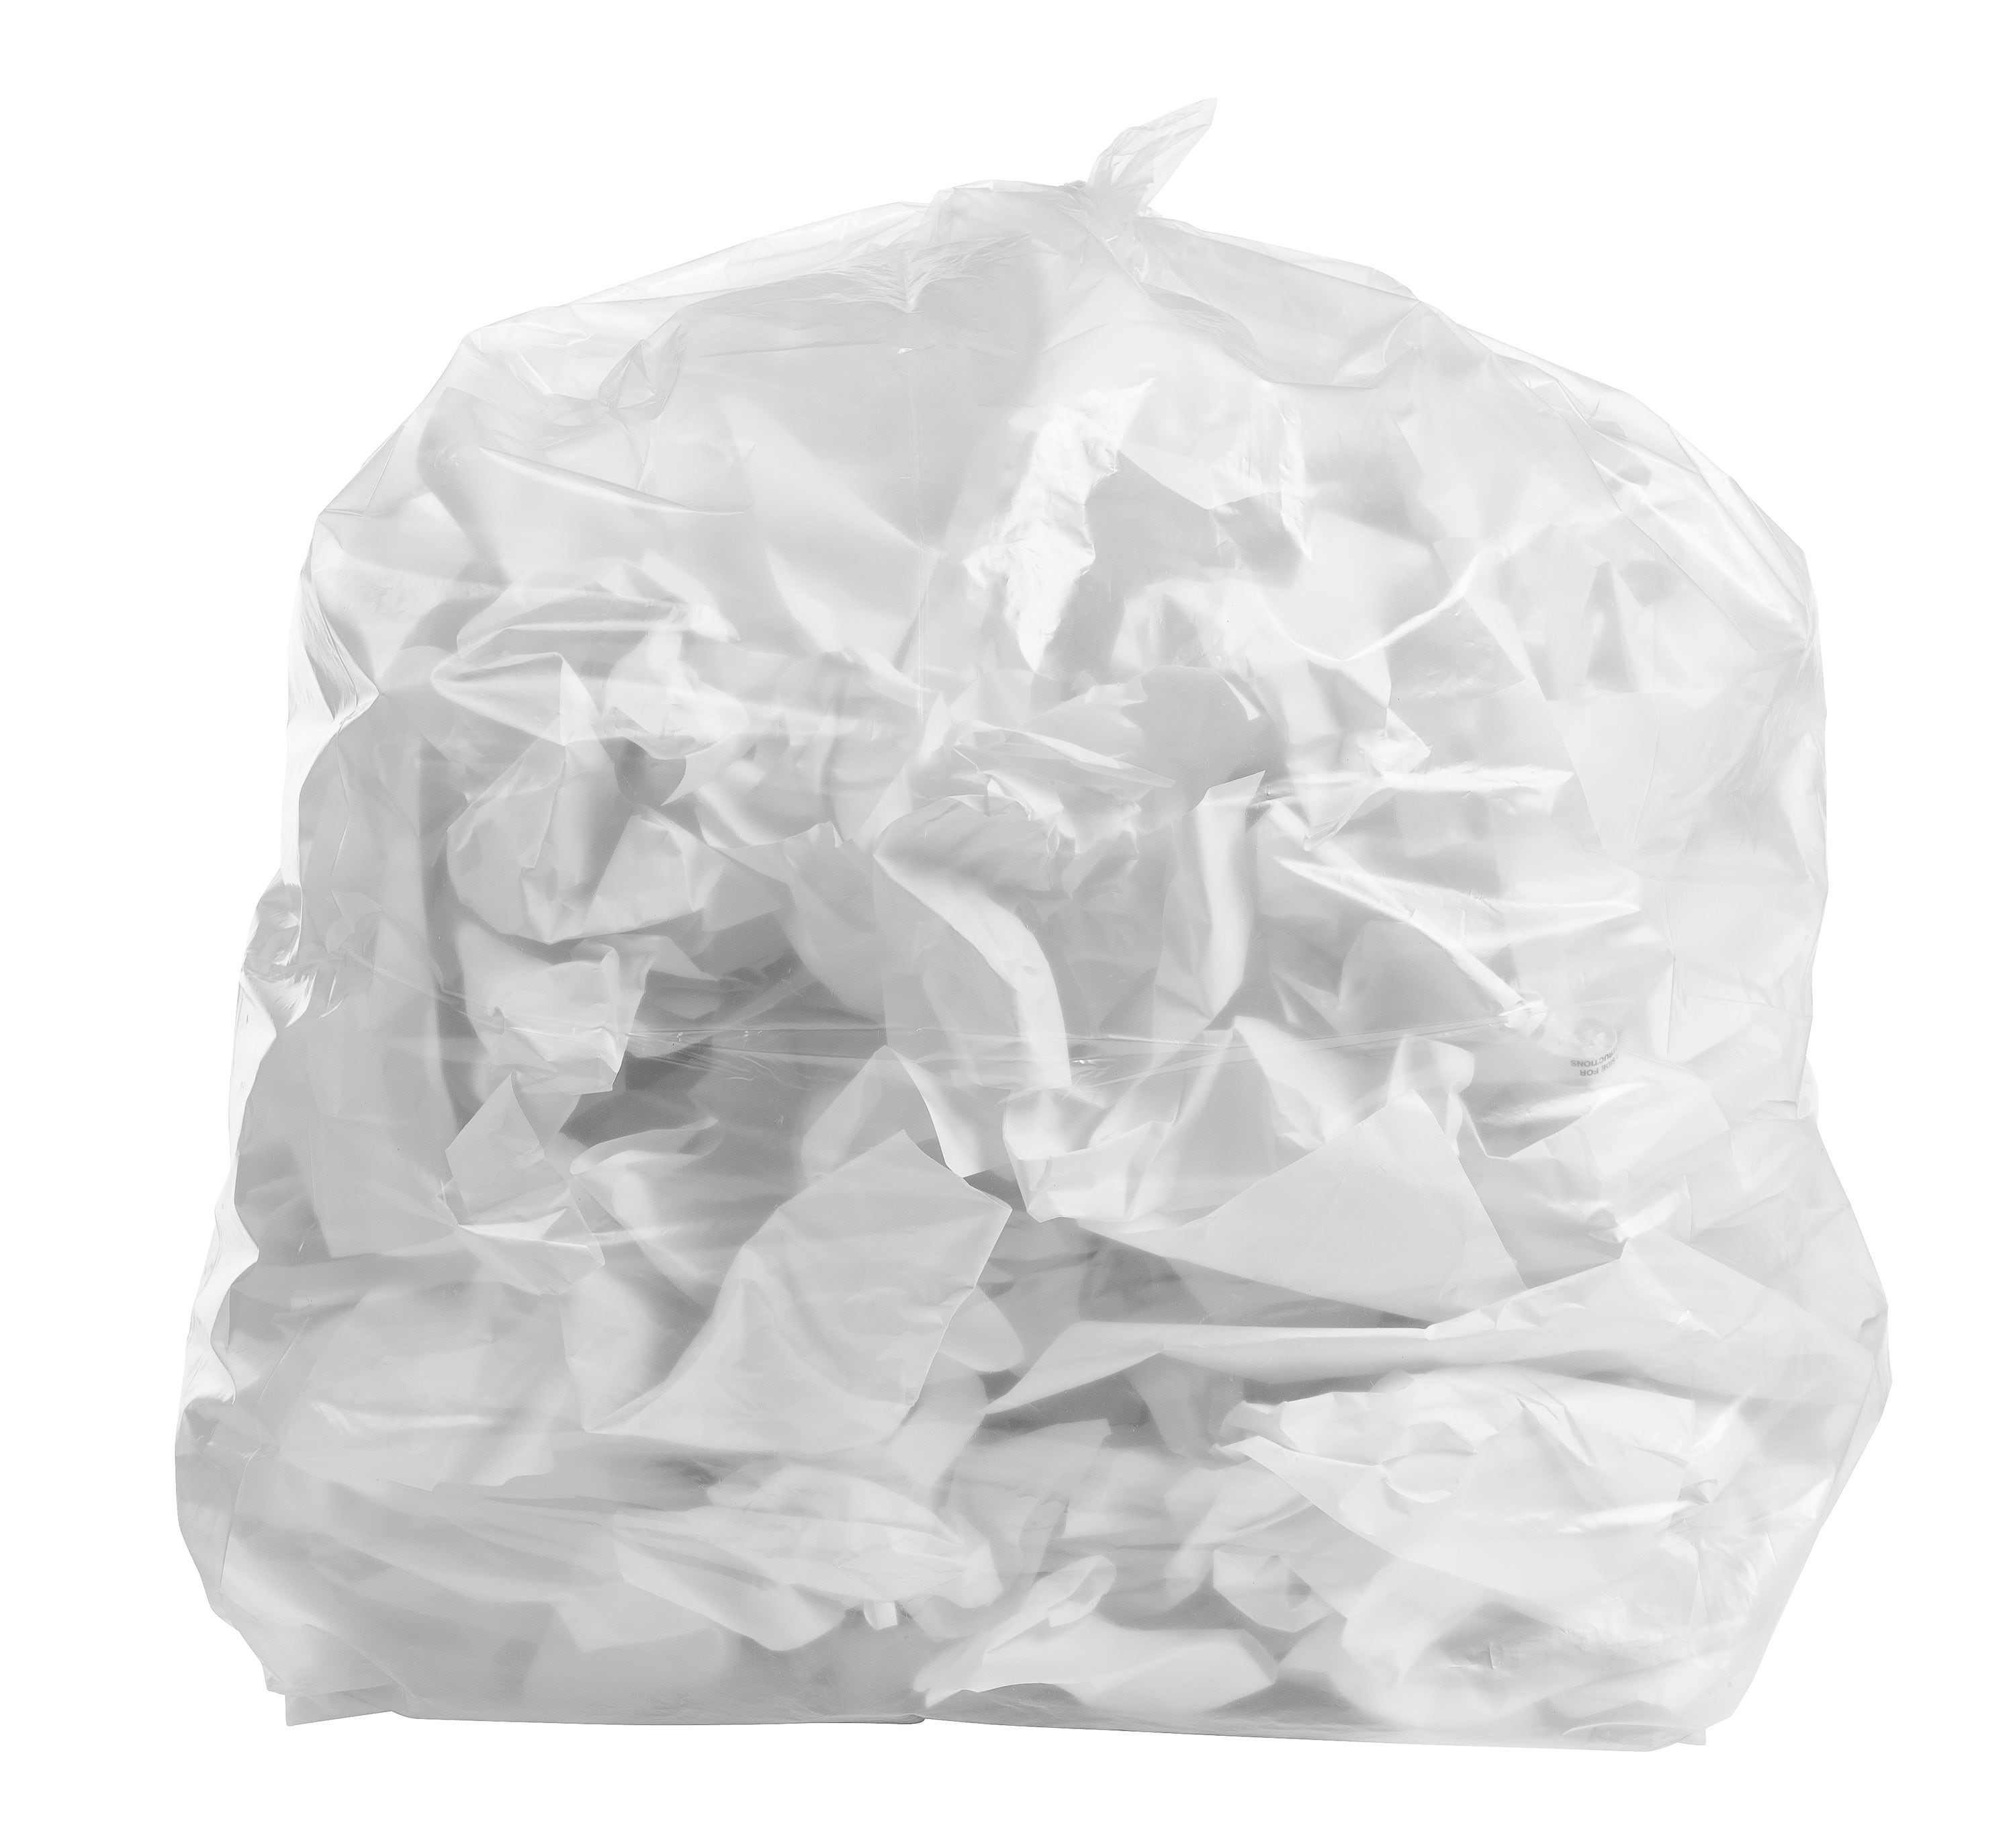 PlasticMill 100 Gallon Garbage Bags: Clear, 1.3 mil, 67x79, 10 Bags.